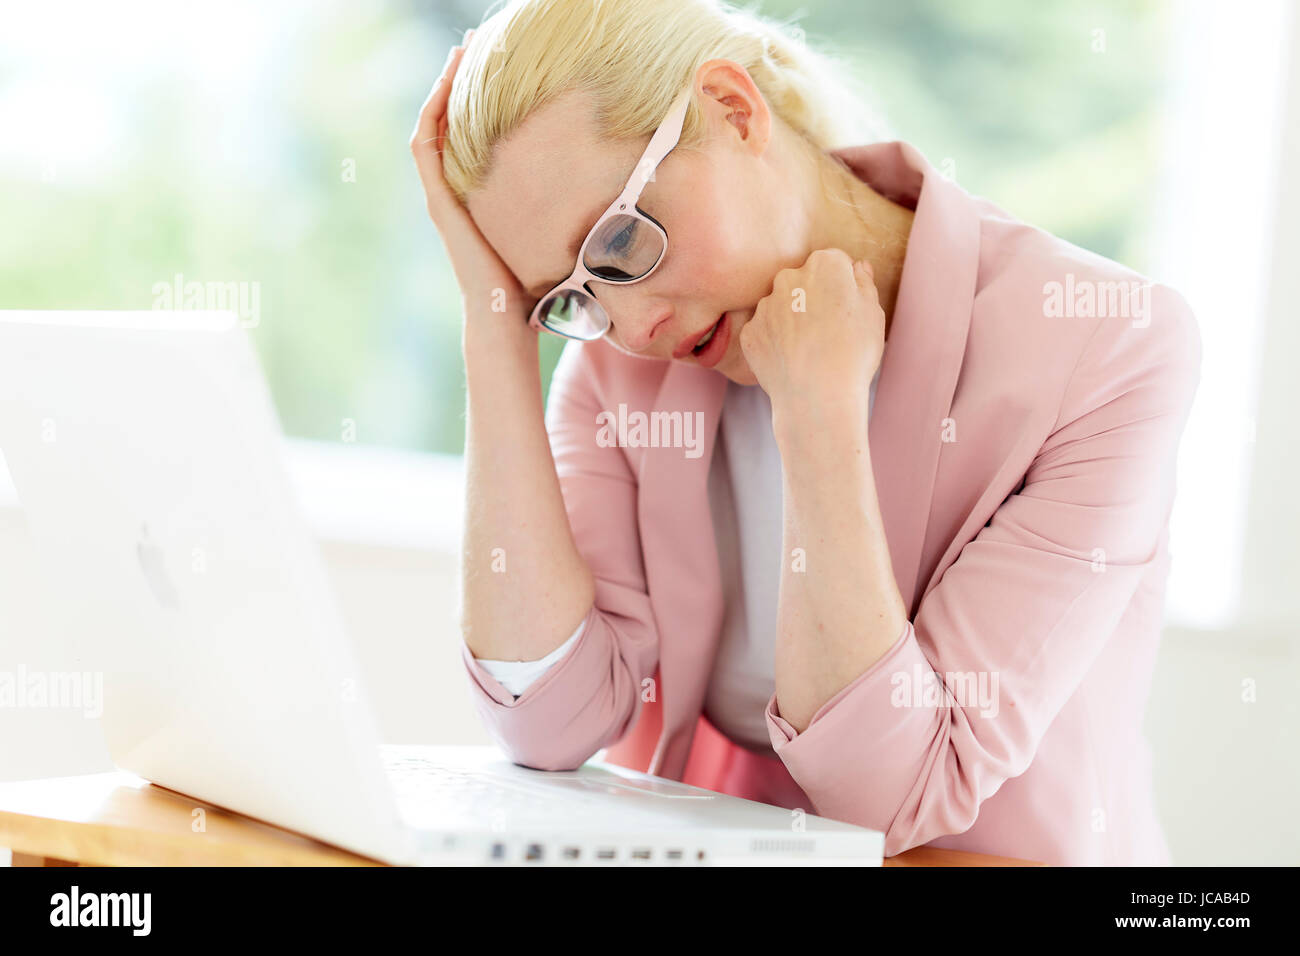 Stressed woman at work Stock Photo